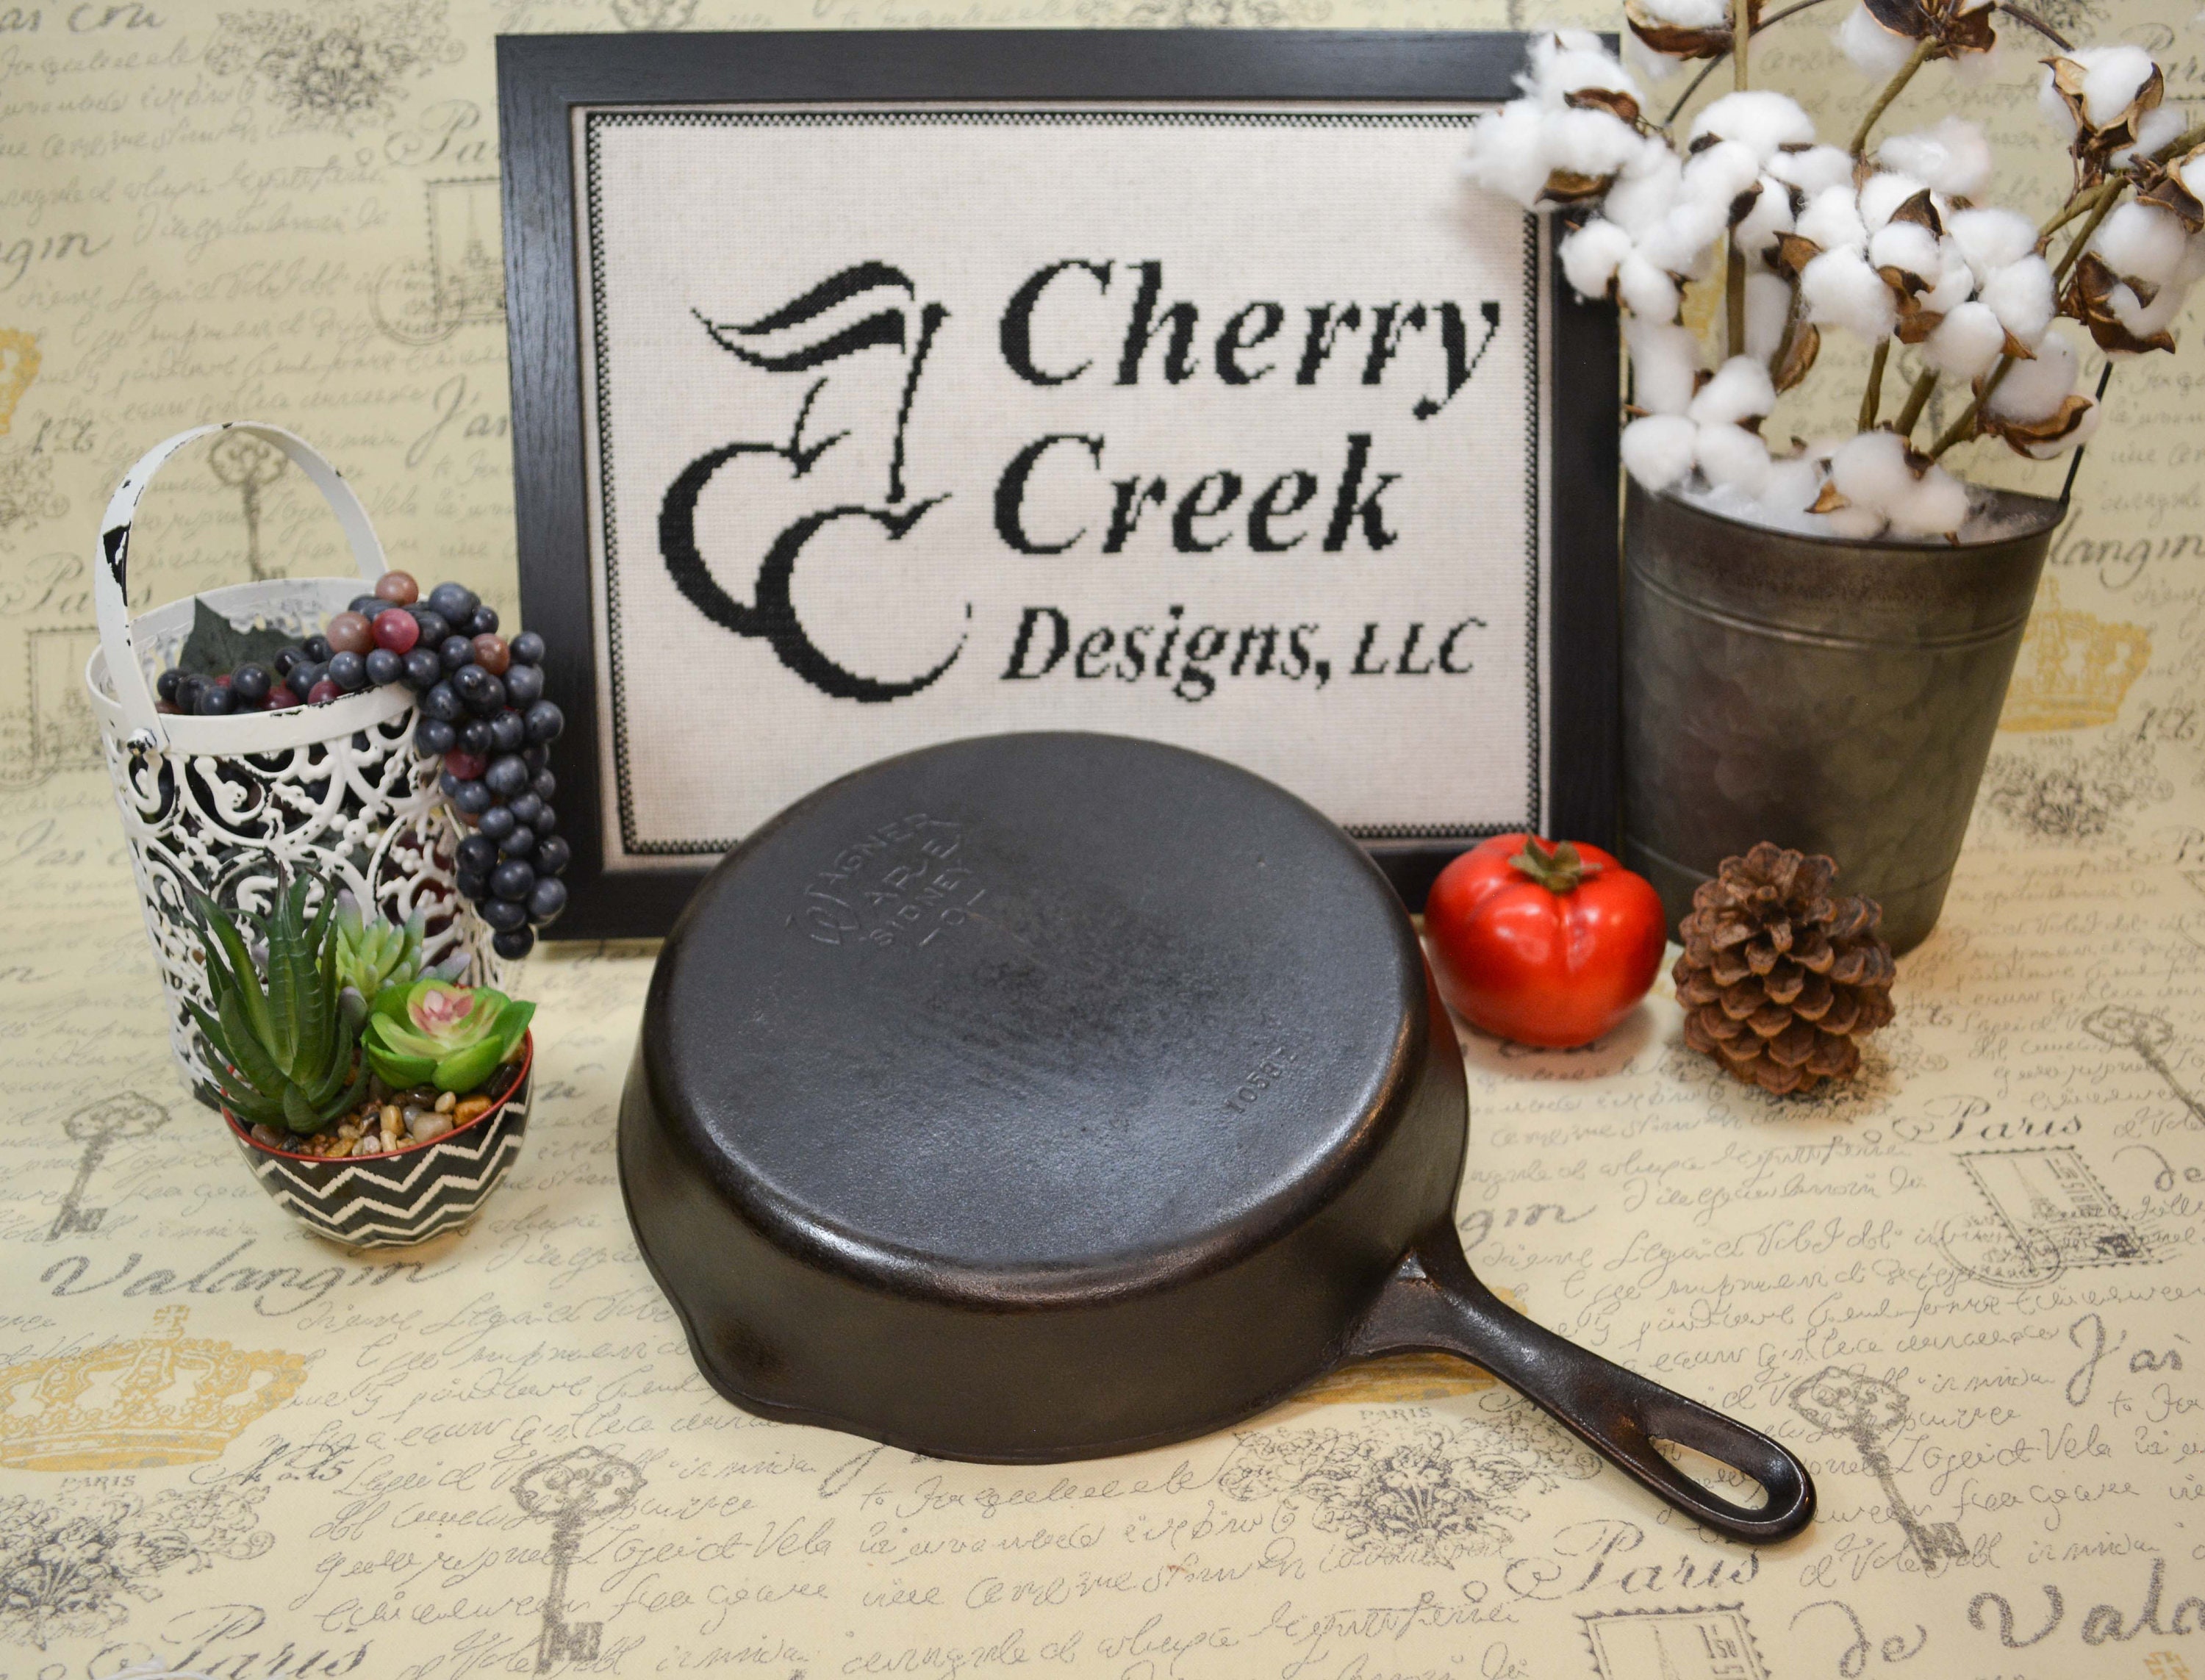 Cast Iron Cookware Wagner Ware Sidney Ohio #1058E No 8 Skillet #18 –  TheDepot.LakeviewOhio